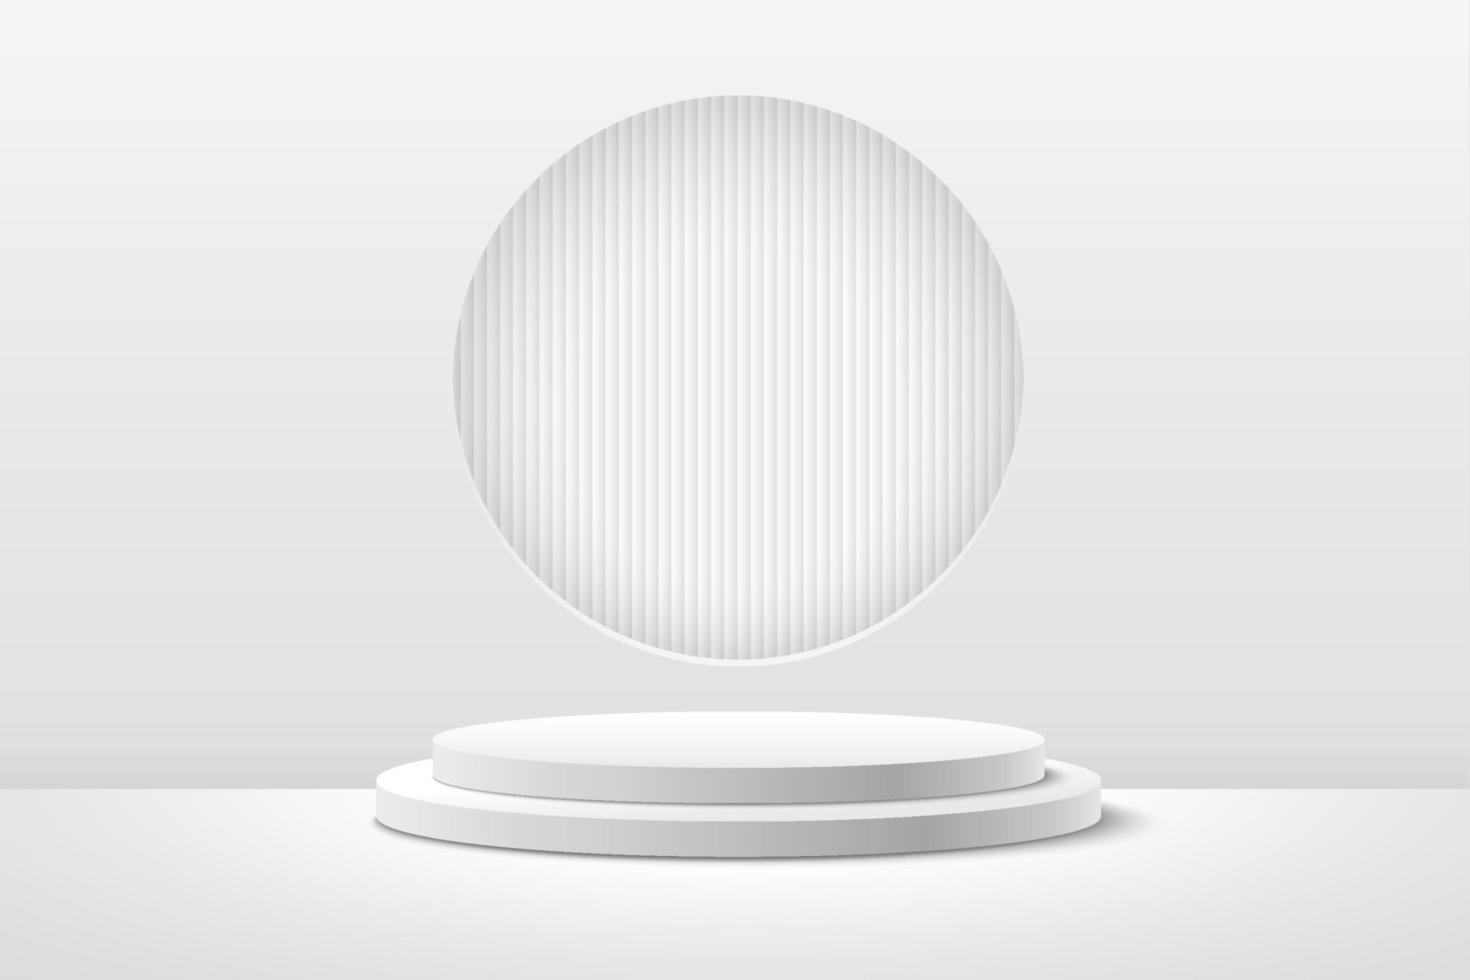 Abstract round display for product on website in modern. Background rendering with podium and minimal white texture wall scene, 3d rendering geometric shape white and grey color. vector